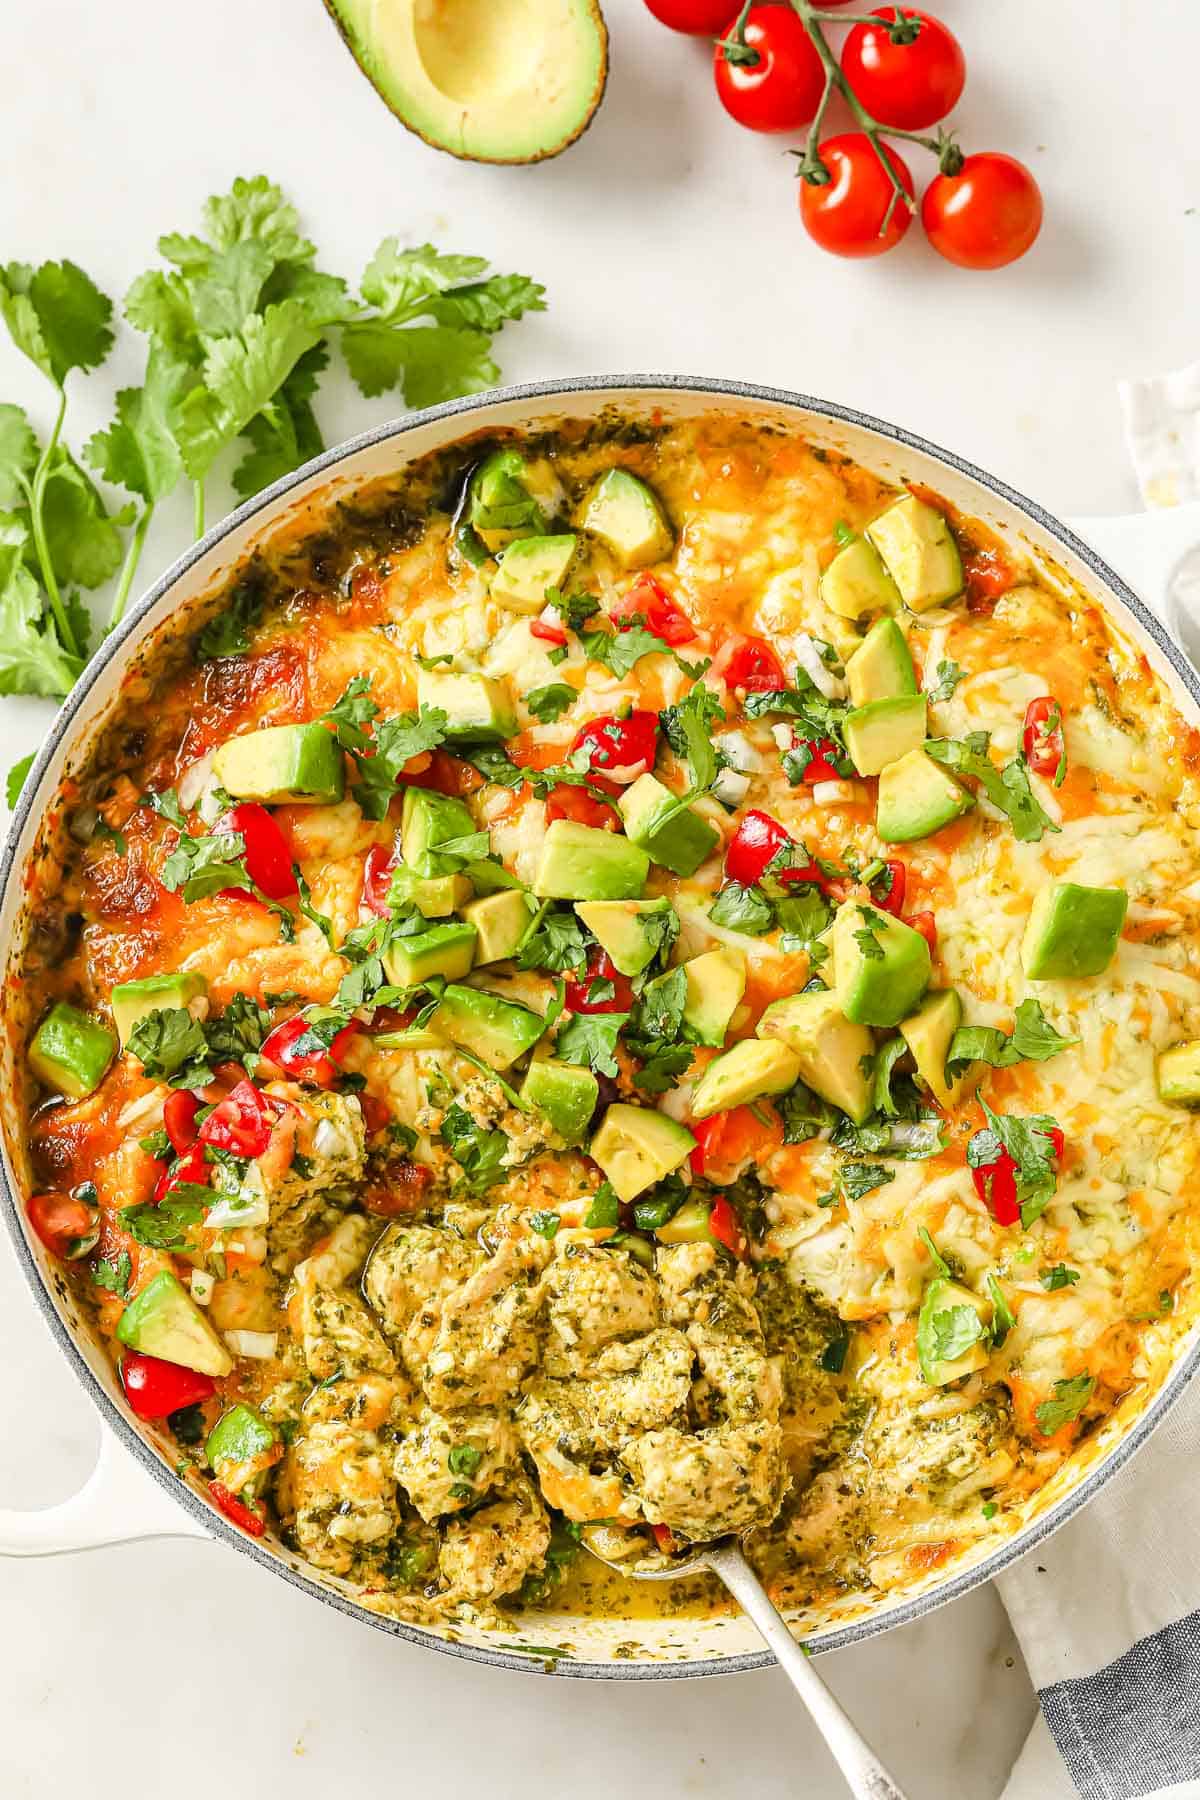 An enameled cast iron skillet filled with a cheesy chicken casserole, topped with salsa verde, cheese, pico de Gallo, avocado, and cilantro.